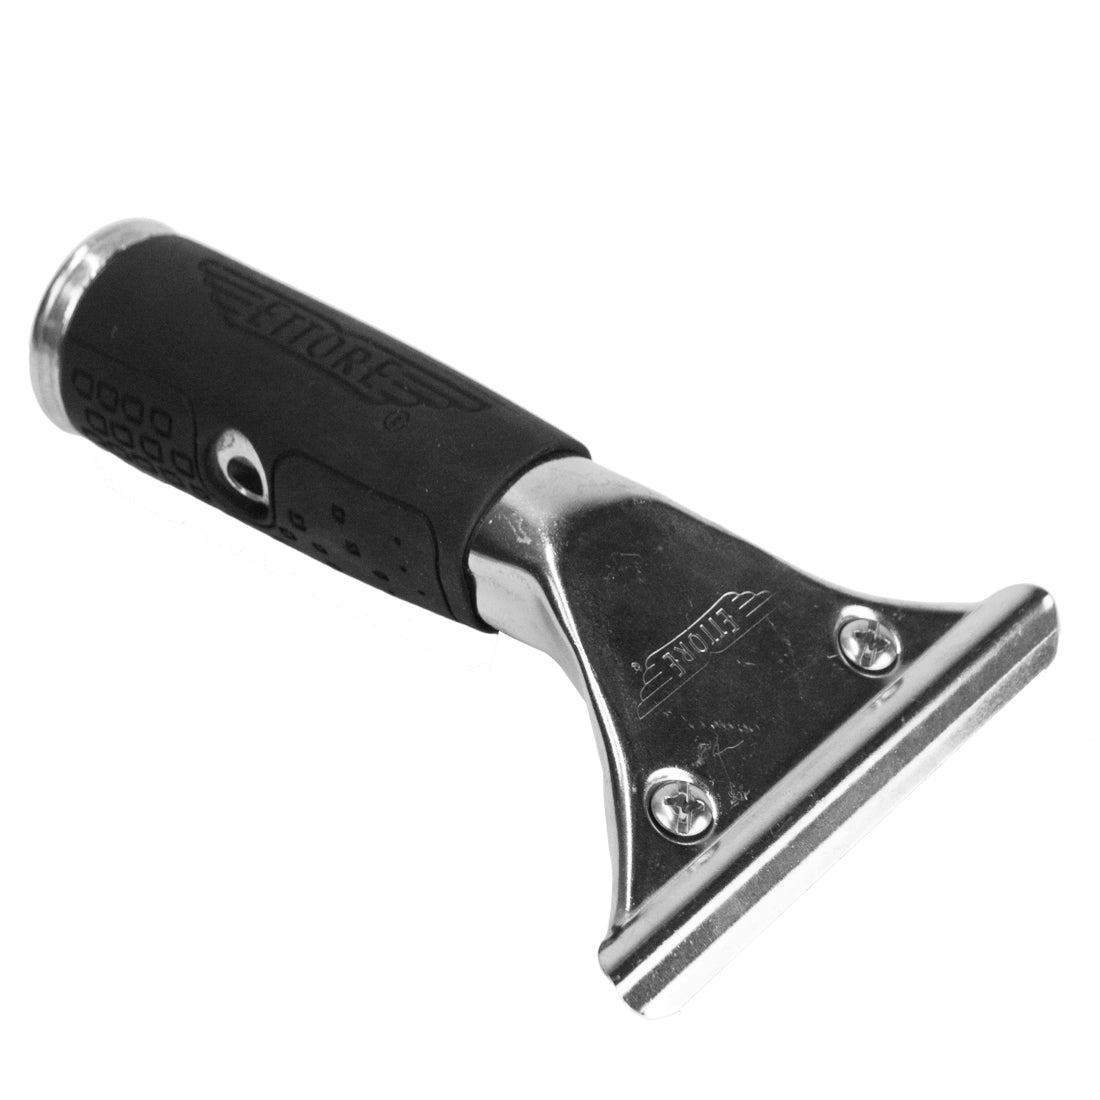 Ettore Stainless Steel Squeegee Handle with Rubber Grip - Oblique Top View